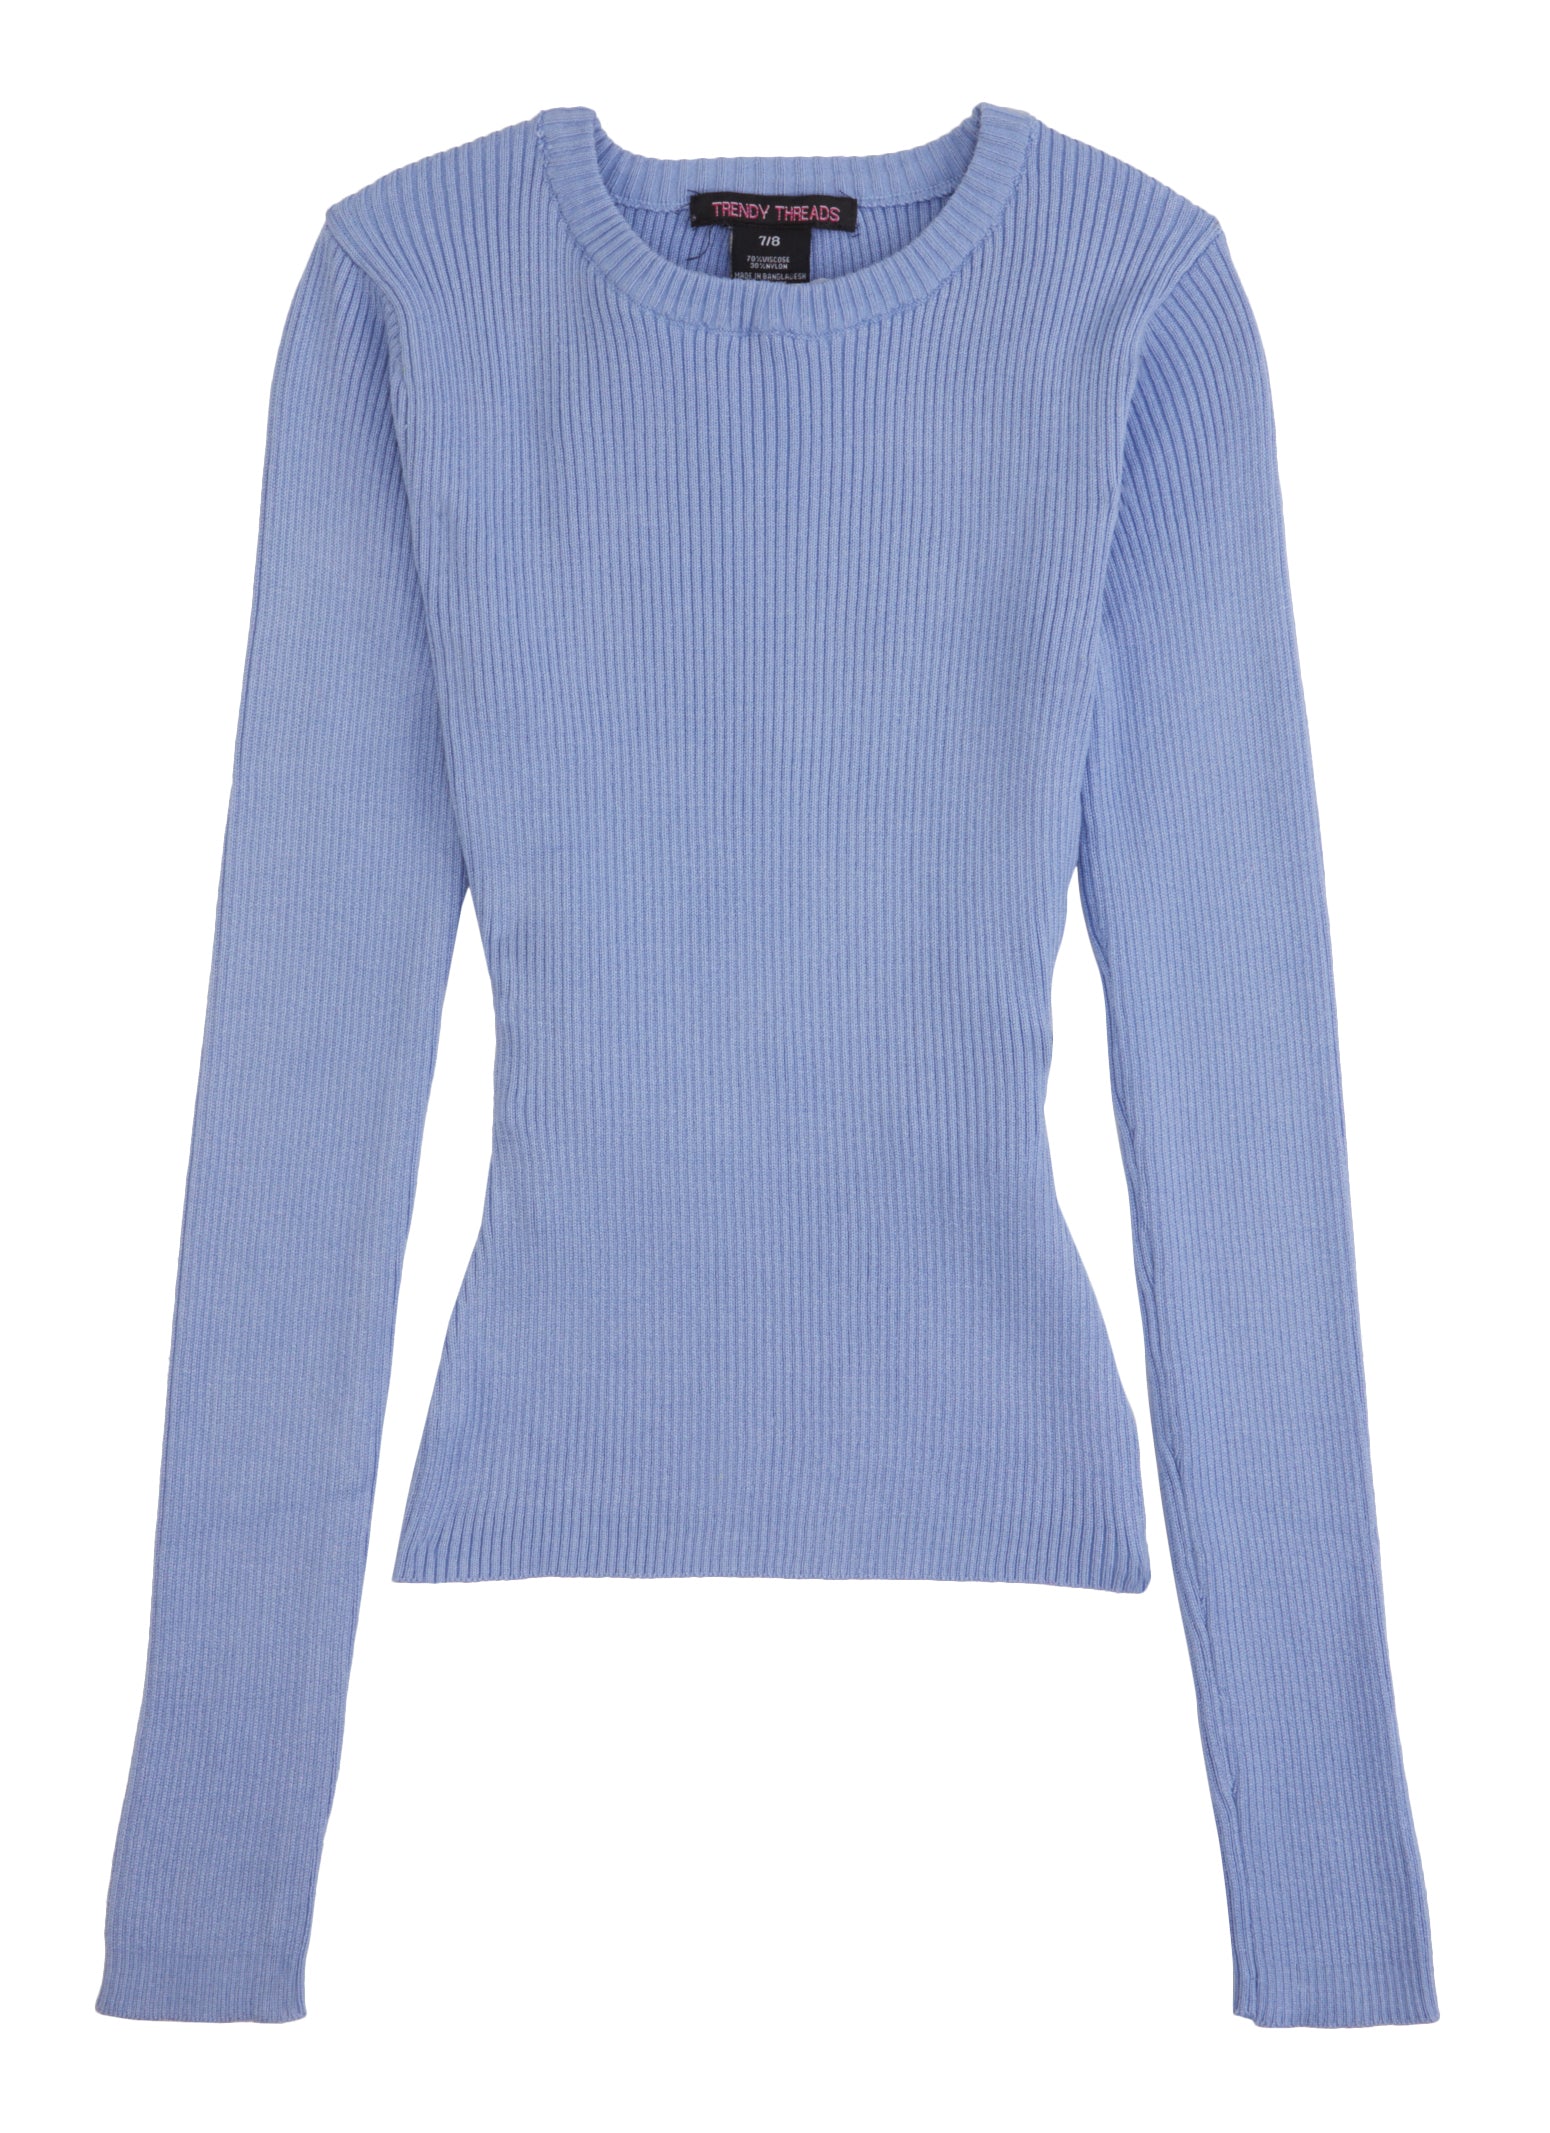 Girls Ribbed Knit Crew Neck Long Sleeve Top, Blue, Size 10-12